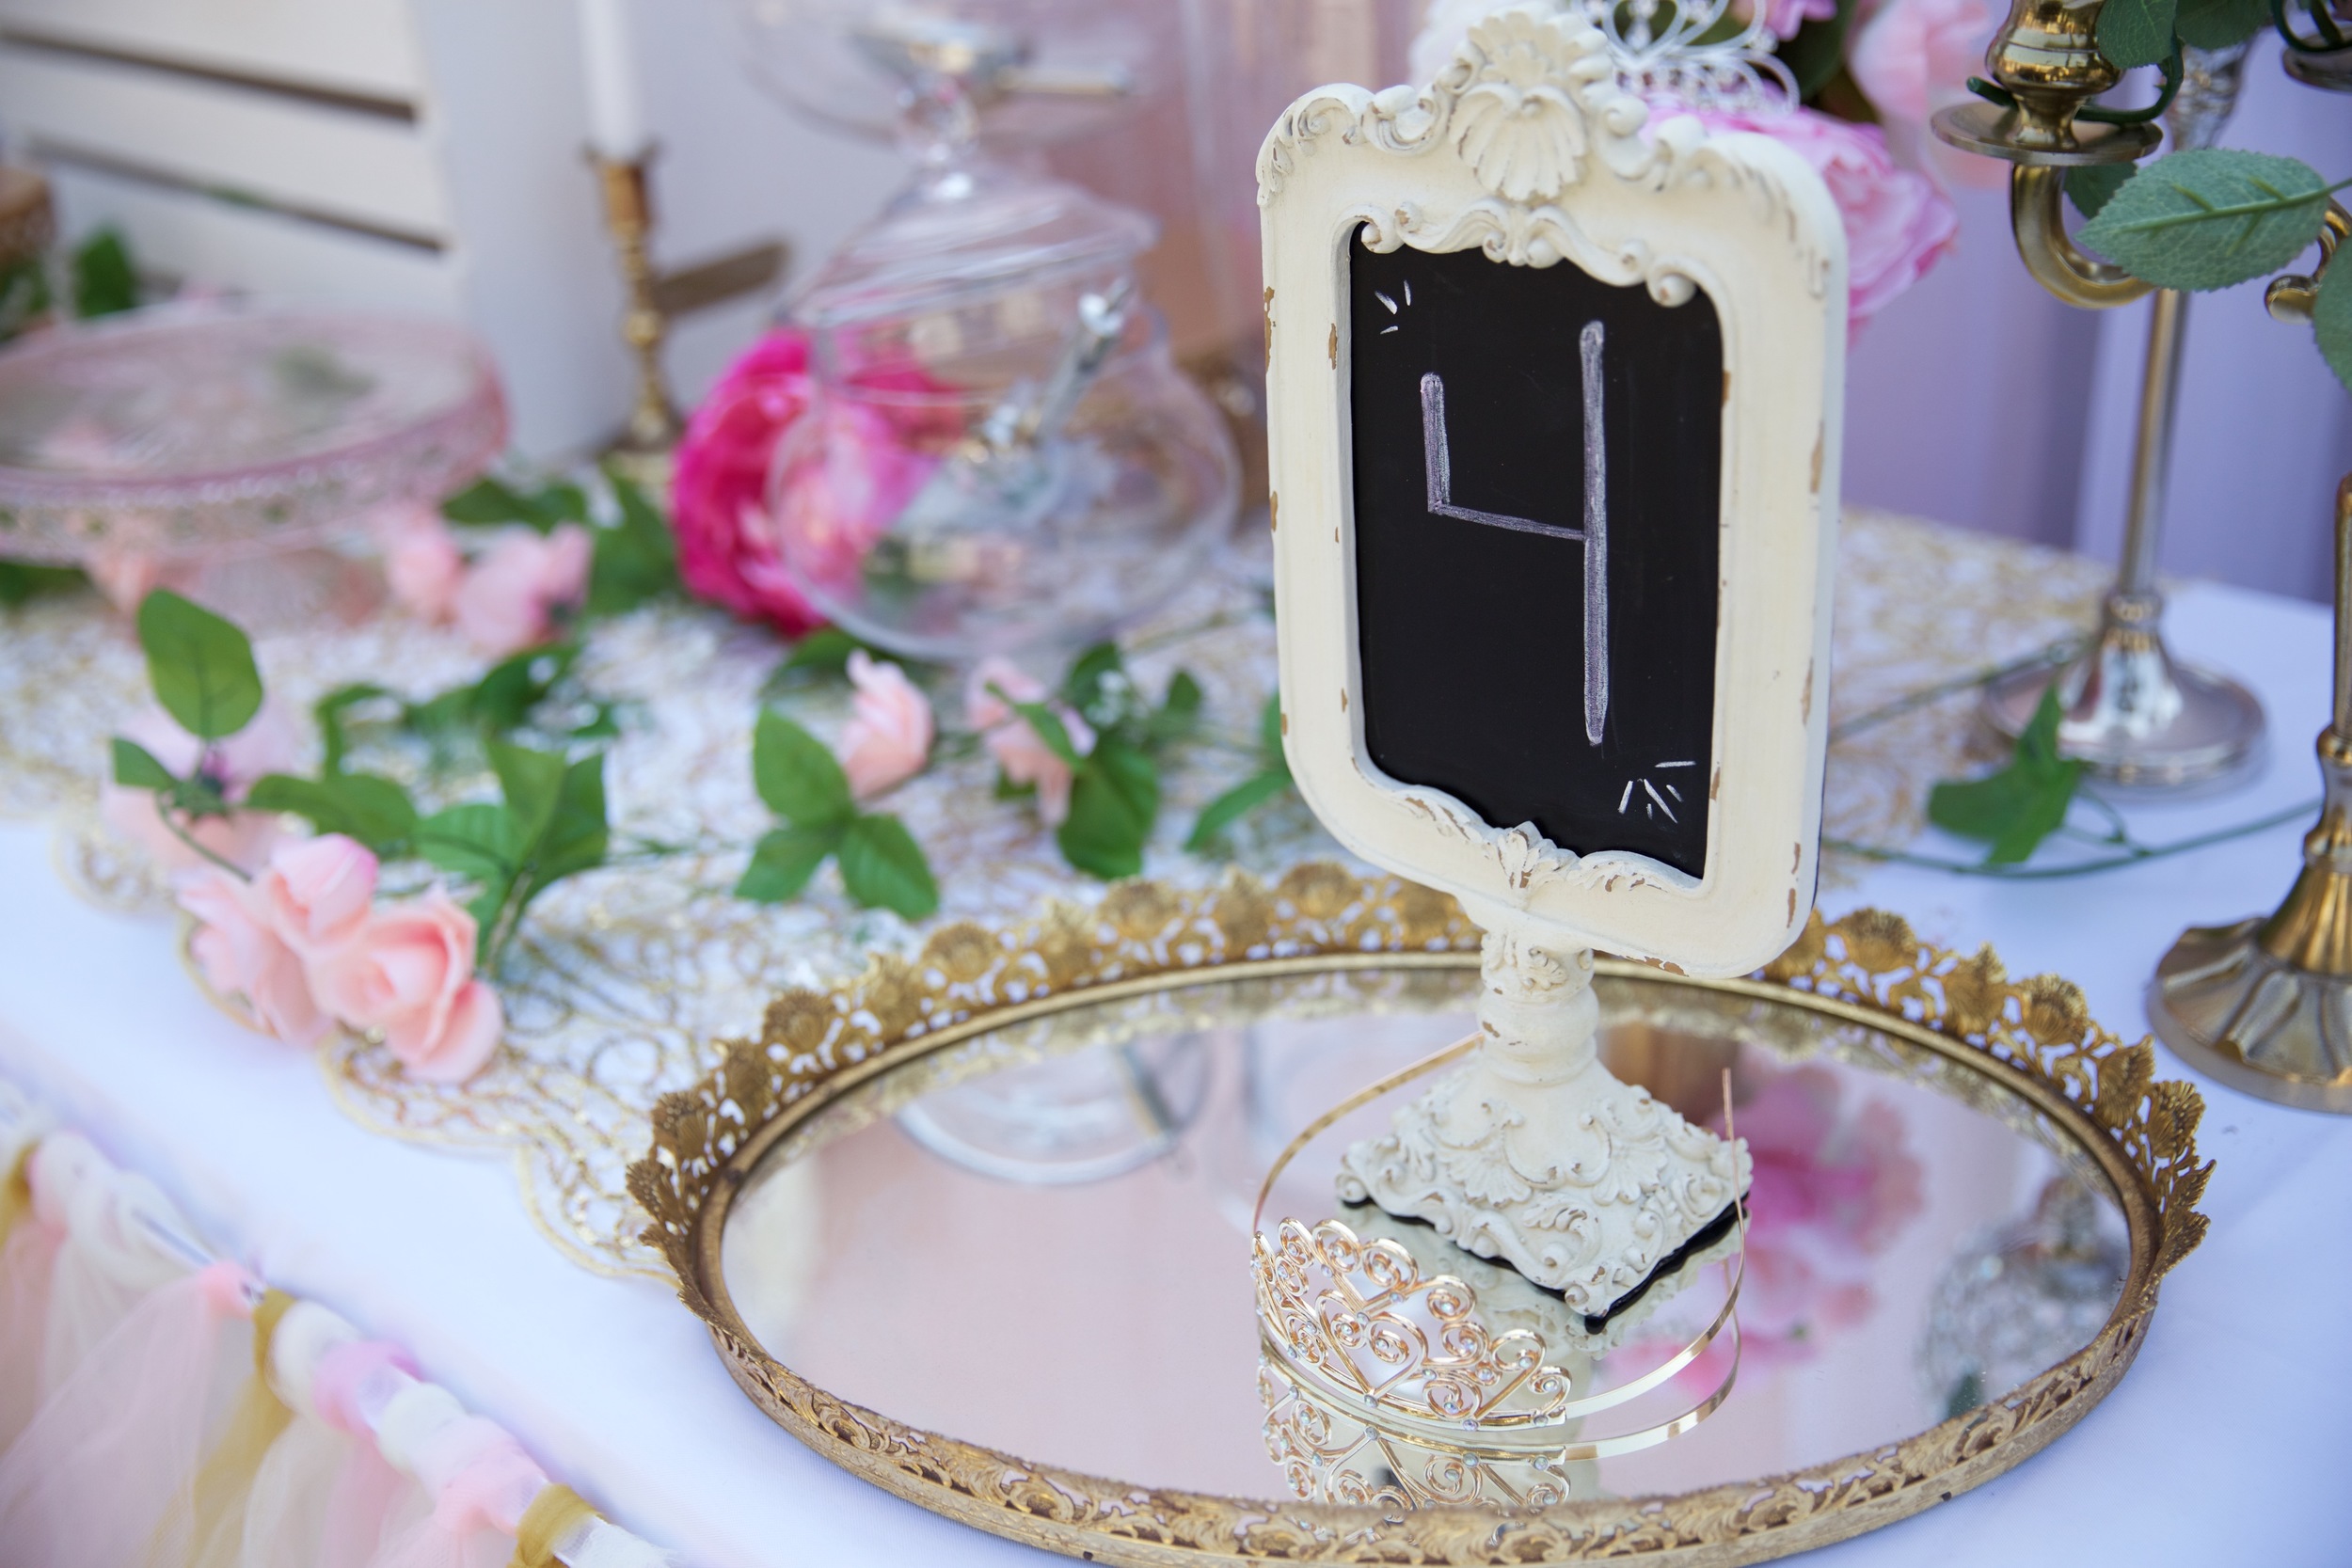 Copy of A rental collection with an elaborate ensemble of pink tutu centerpieces, white chiavari chairs, glittery runners, pink and white flowers, and sparkling tiaras that will dazzle even a Queen! 